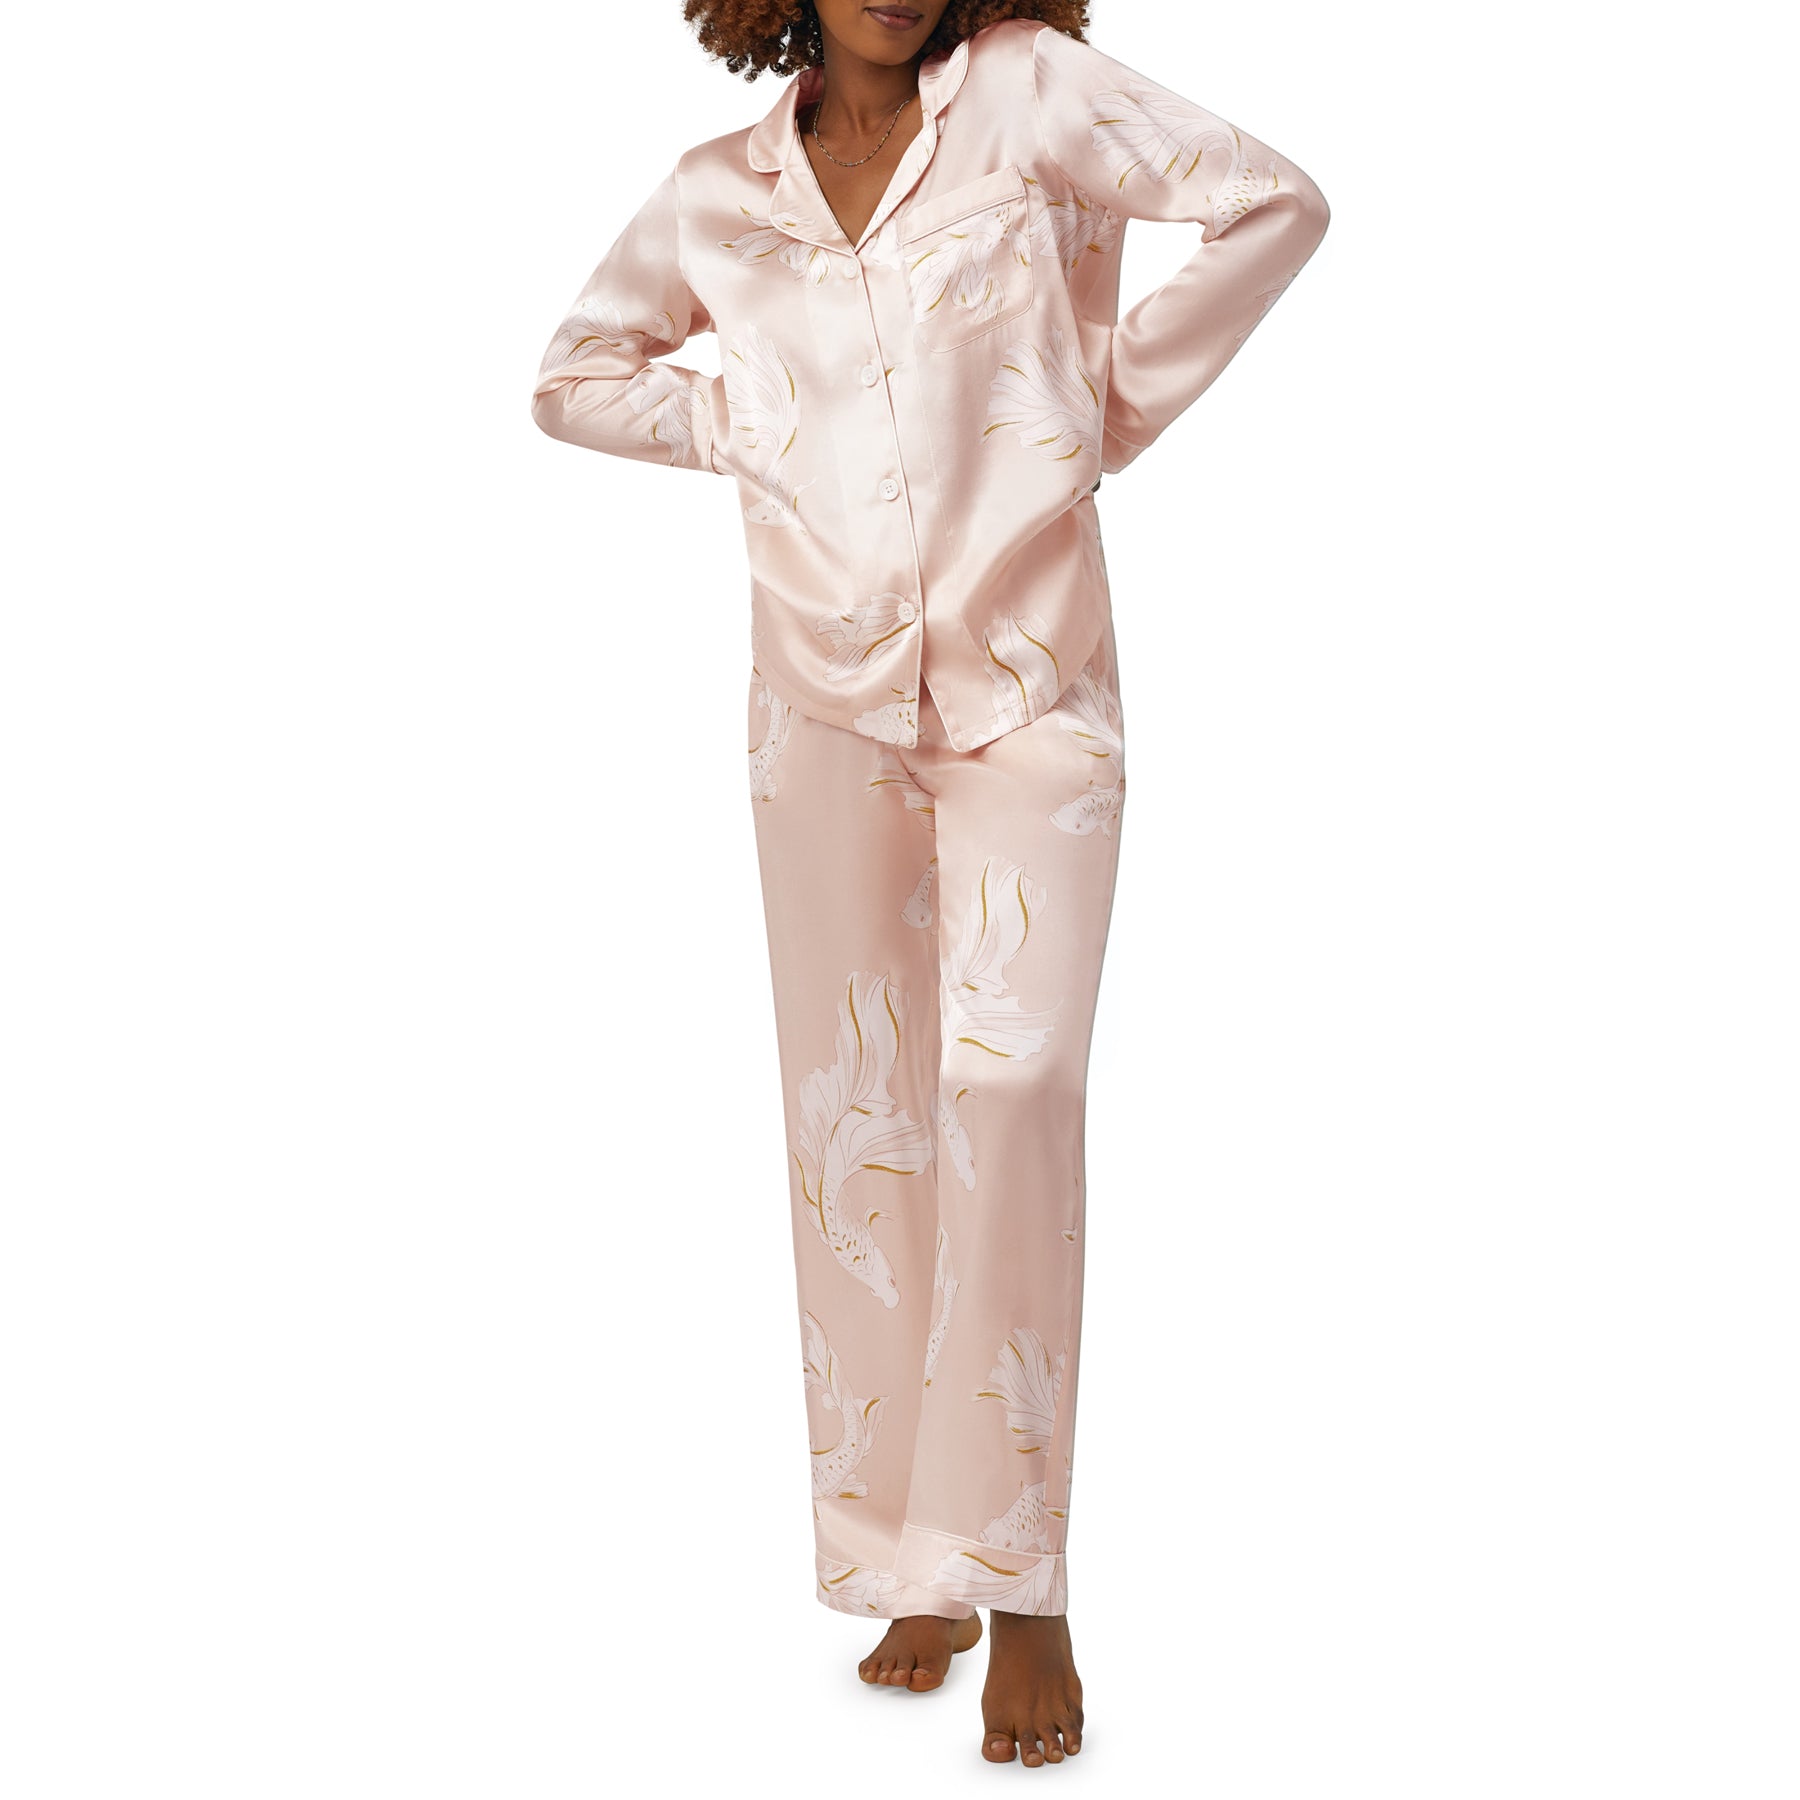 KEHUAN 2 in 1 Built-in Bra pajamas Dress With Chest Pad,White-L :  : Fashion